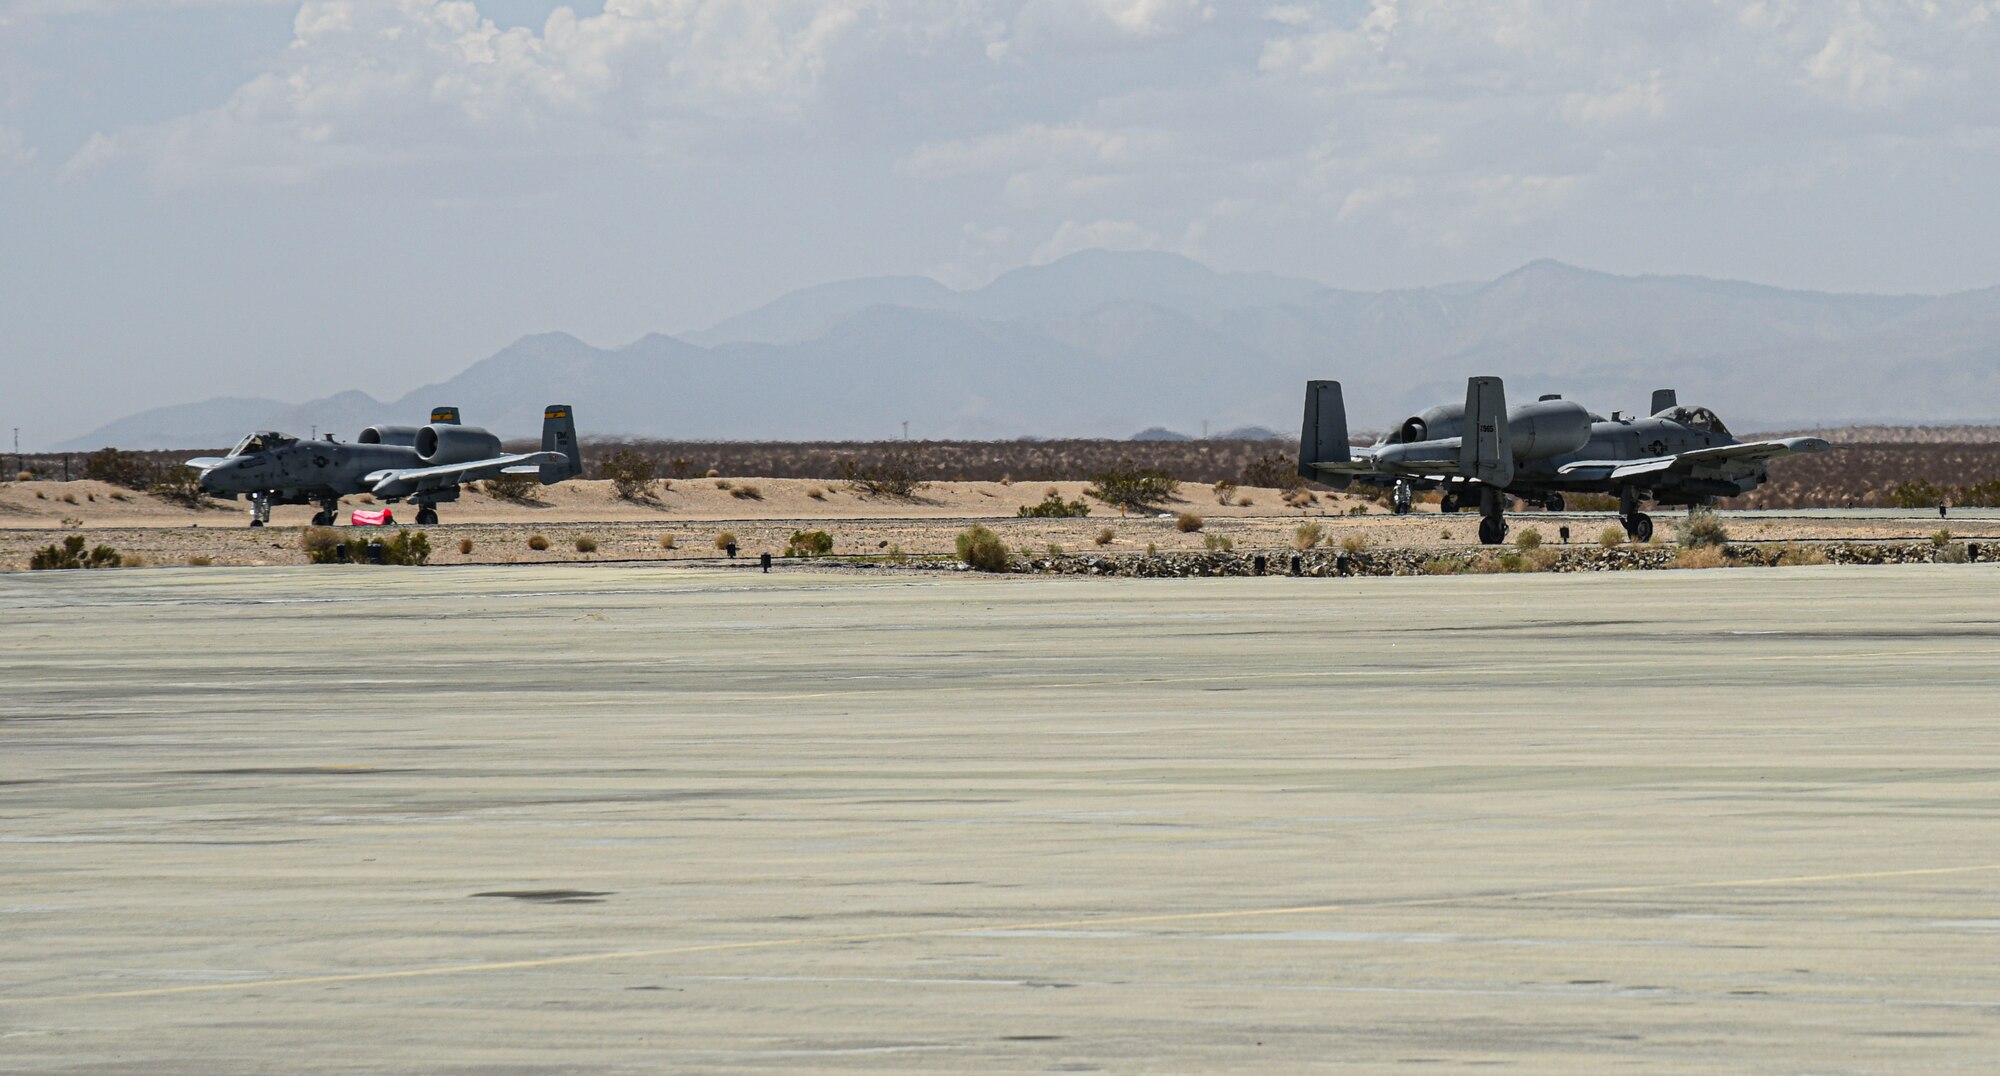 Pictured above are two aircraft drive down a taxiway after landing.